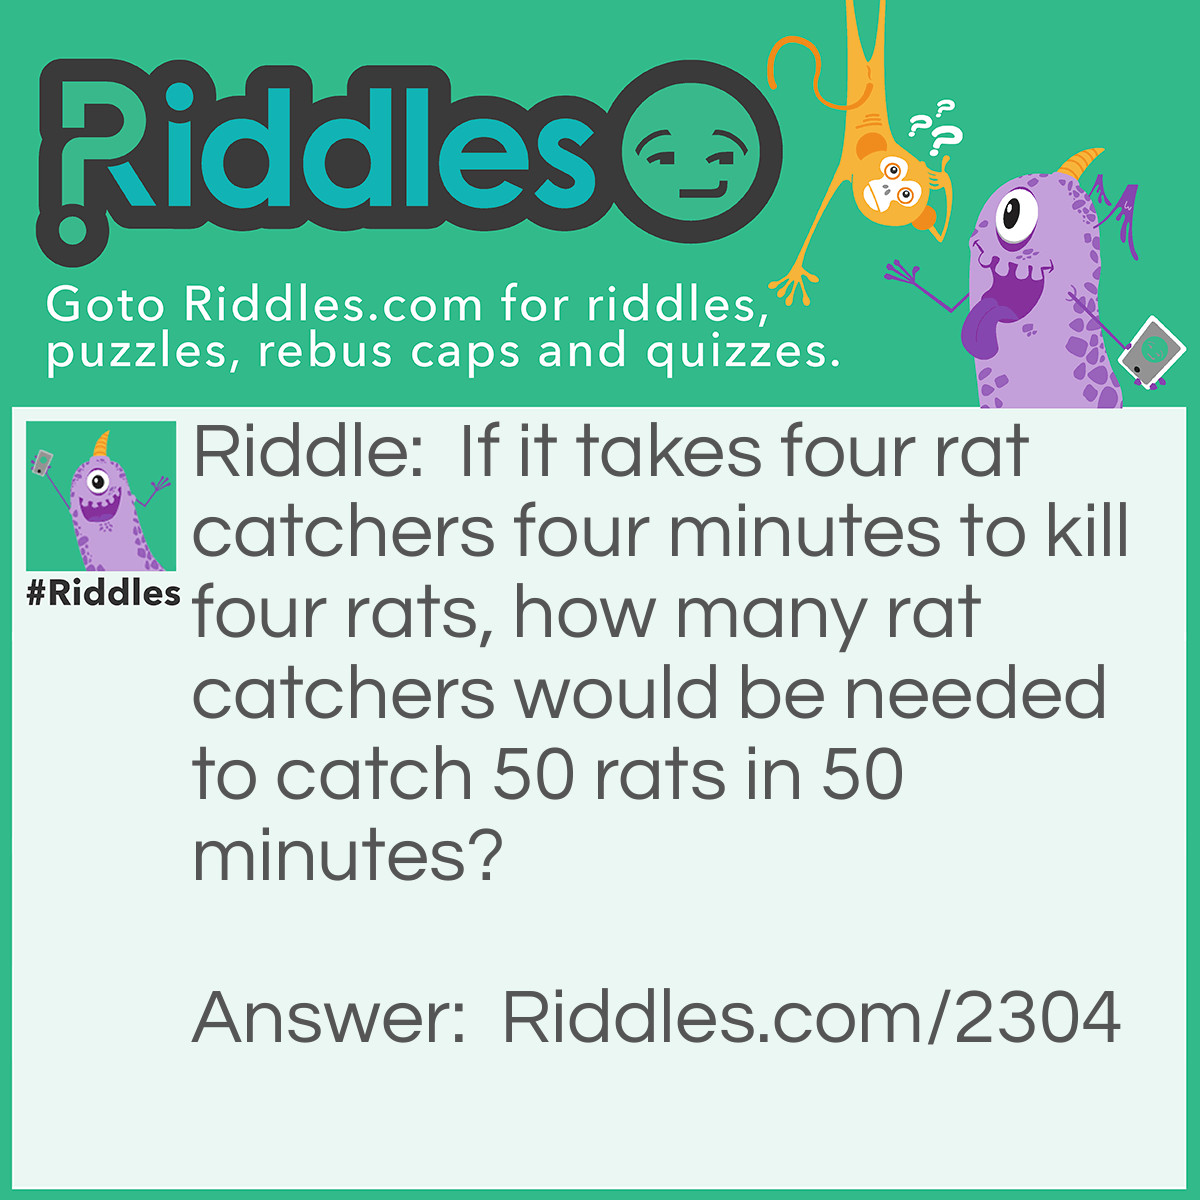 Riddle: If it takes four rat catchers four minutes to kill fourrats, how many rat catchers would be needed to catch 50 rats in 50 minutes? Answer: The same number of rat catchers- Four.